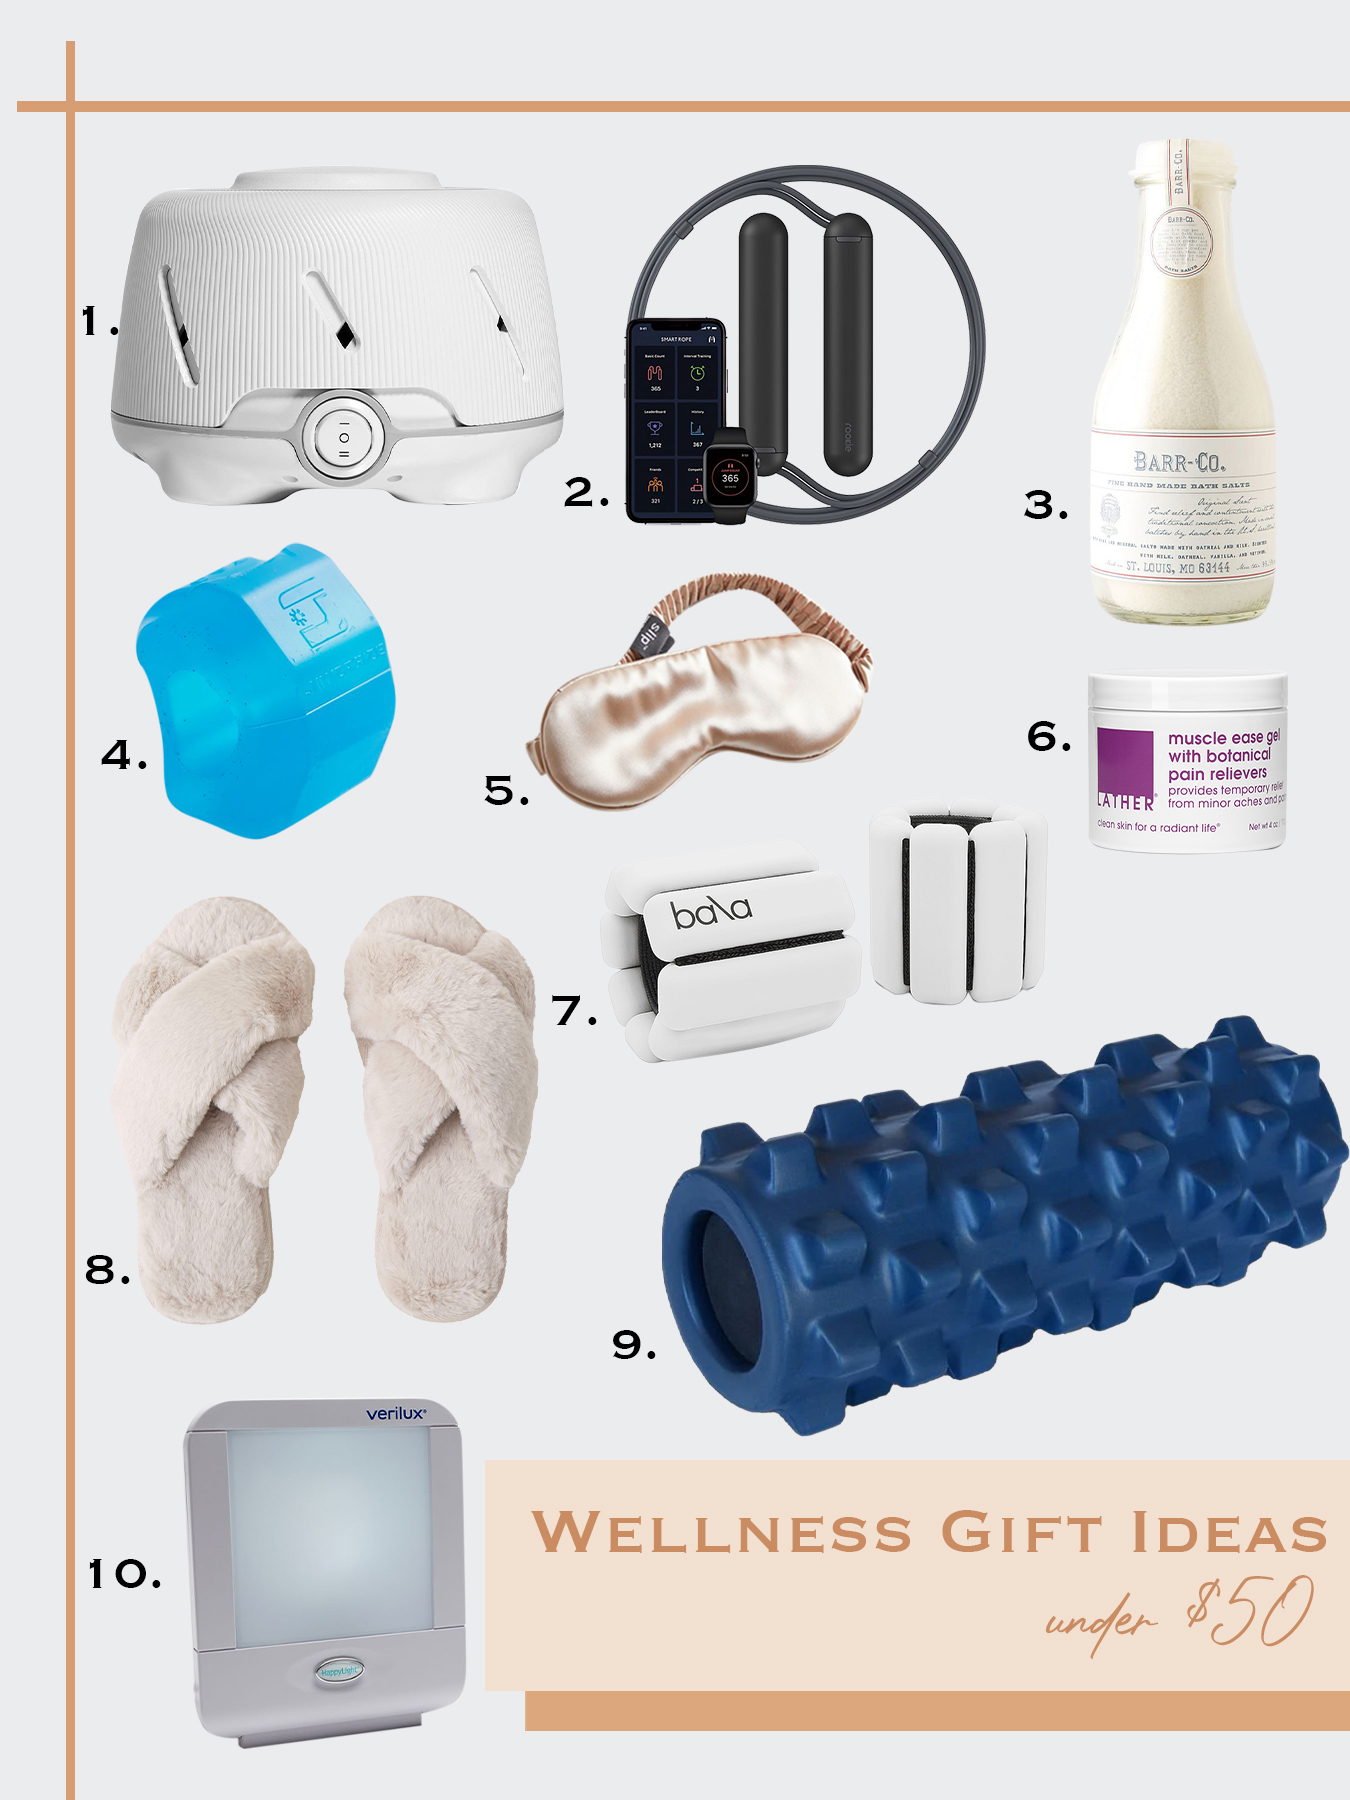 30 Wellness Gift Ideas For Any Budget Tea Cups & Tulips